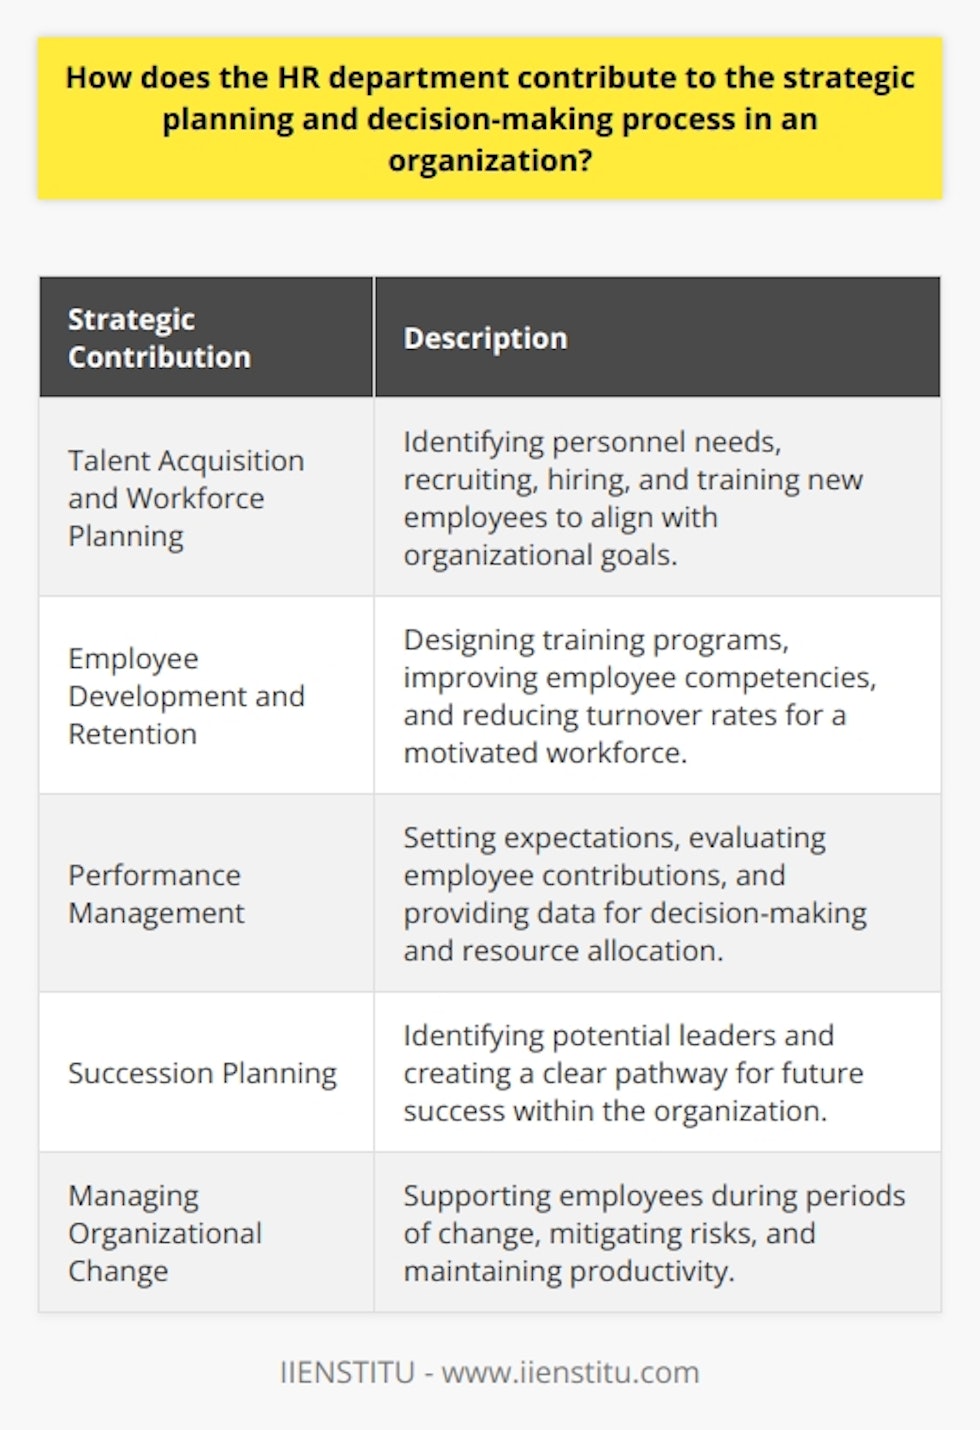 The HR department is an integral part of the strategic planning and decision-making process in any organization. By aligning the company's human capital with its overall goals, HR contributes to the success and sustainability of the organization.One of the main ways HR contributes to strategic planning is through talent acquisition and workforce planning. The HR team identifies the personnel needs of the organization and recruits, hires, and trains new employees accordingly. By acquiring skilled professionals, HR ensures that the organization has the necessary resources to execute its vision and meet its targets.Employee development and retention are also critical aspects of strategic planning, and this is where HR departments play a significant role. They design training and development programs to improve employee competencies, enabling the organization to adapt to industry changes and stay competitive. Additionally, HR's retention strategies focus on increasing employee satisfaction and reducing high turnover rates, which contribute to a stable and motivated workforce.The HR department also works on performance management, which involves setting clear expectations and implementing a systematic evaluation process to track employees' contributions to the organization's objectives. Performance management provides valuable data for decision-making and helps identify areas needing improvement or additional resources, ensuring the efficient allocation of resources.HR also plays a crucial role in succession planning and managing organizational change, both of which directly impact strategic planning. Through succession planning, the HR department identifies potential leaders within the organization, providing a clear pathway for future success. Additionally, HR supports organizations during periods of change, helping employees adapt to new processes and systems, mitigating risks, and maintaining productivity.In conclusion, the HR department is instrumental in the strategic planning and decision-making process within an organization. Through talent acquisition and workforce planning, employee development and retention, performance management and evaluation, and succession planning and organizational change, HR departments ensure that the organization has the human capital necessary to execute its vision and achieve long-term success.